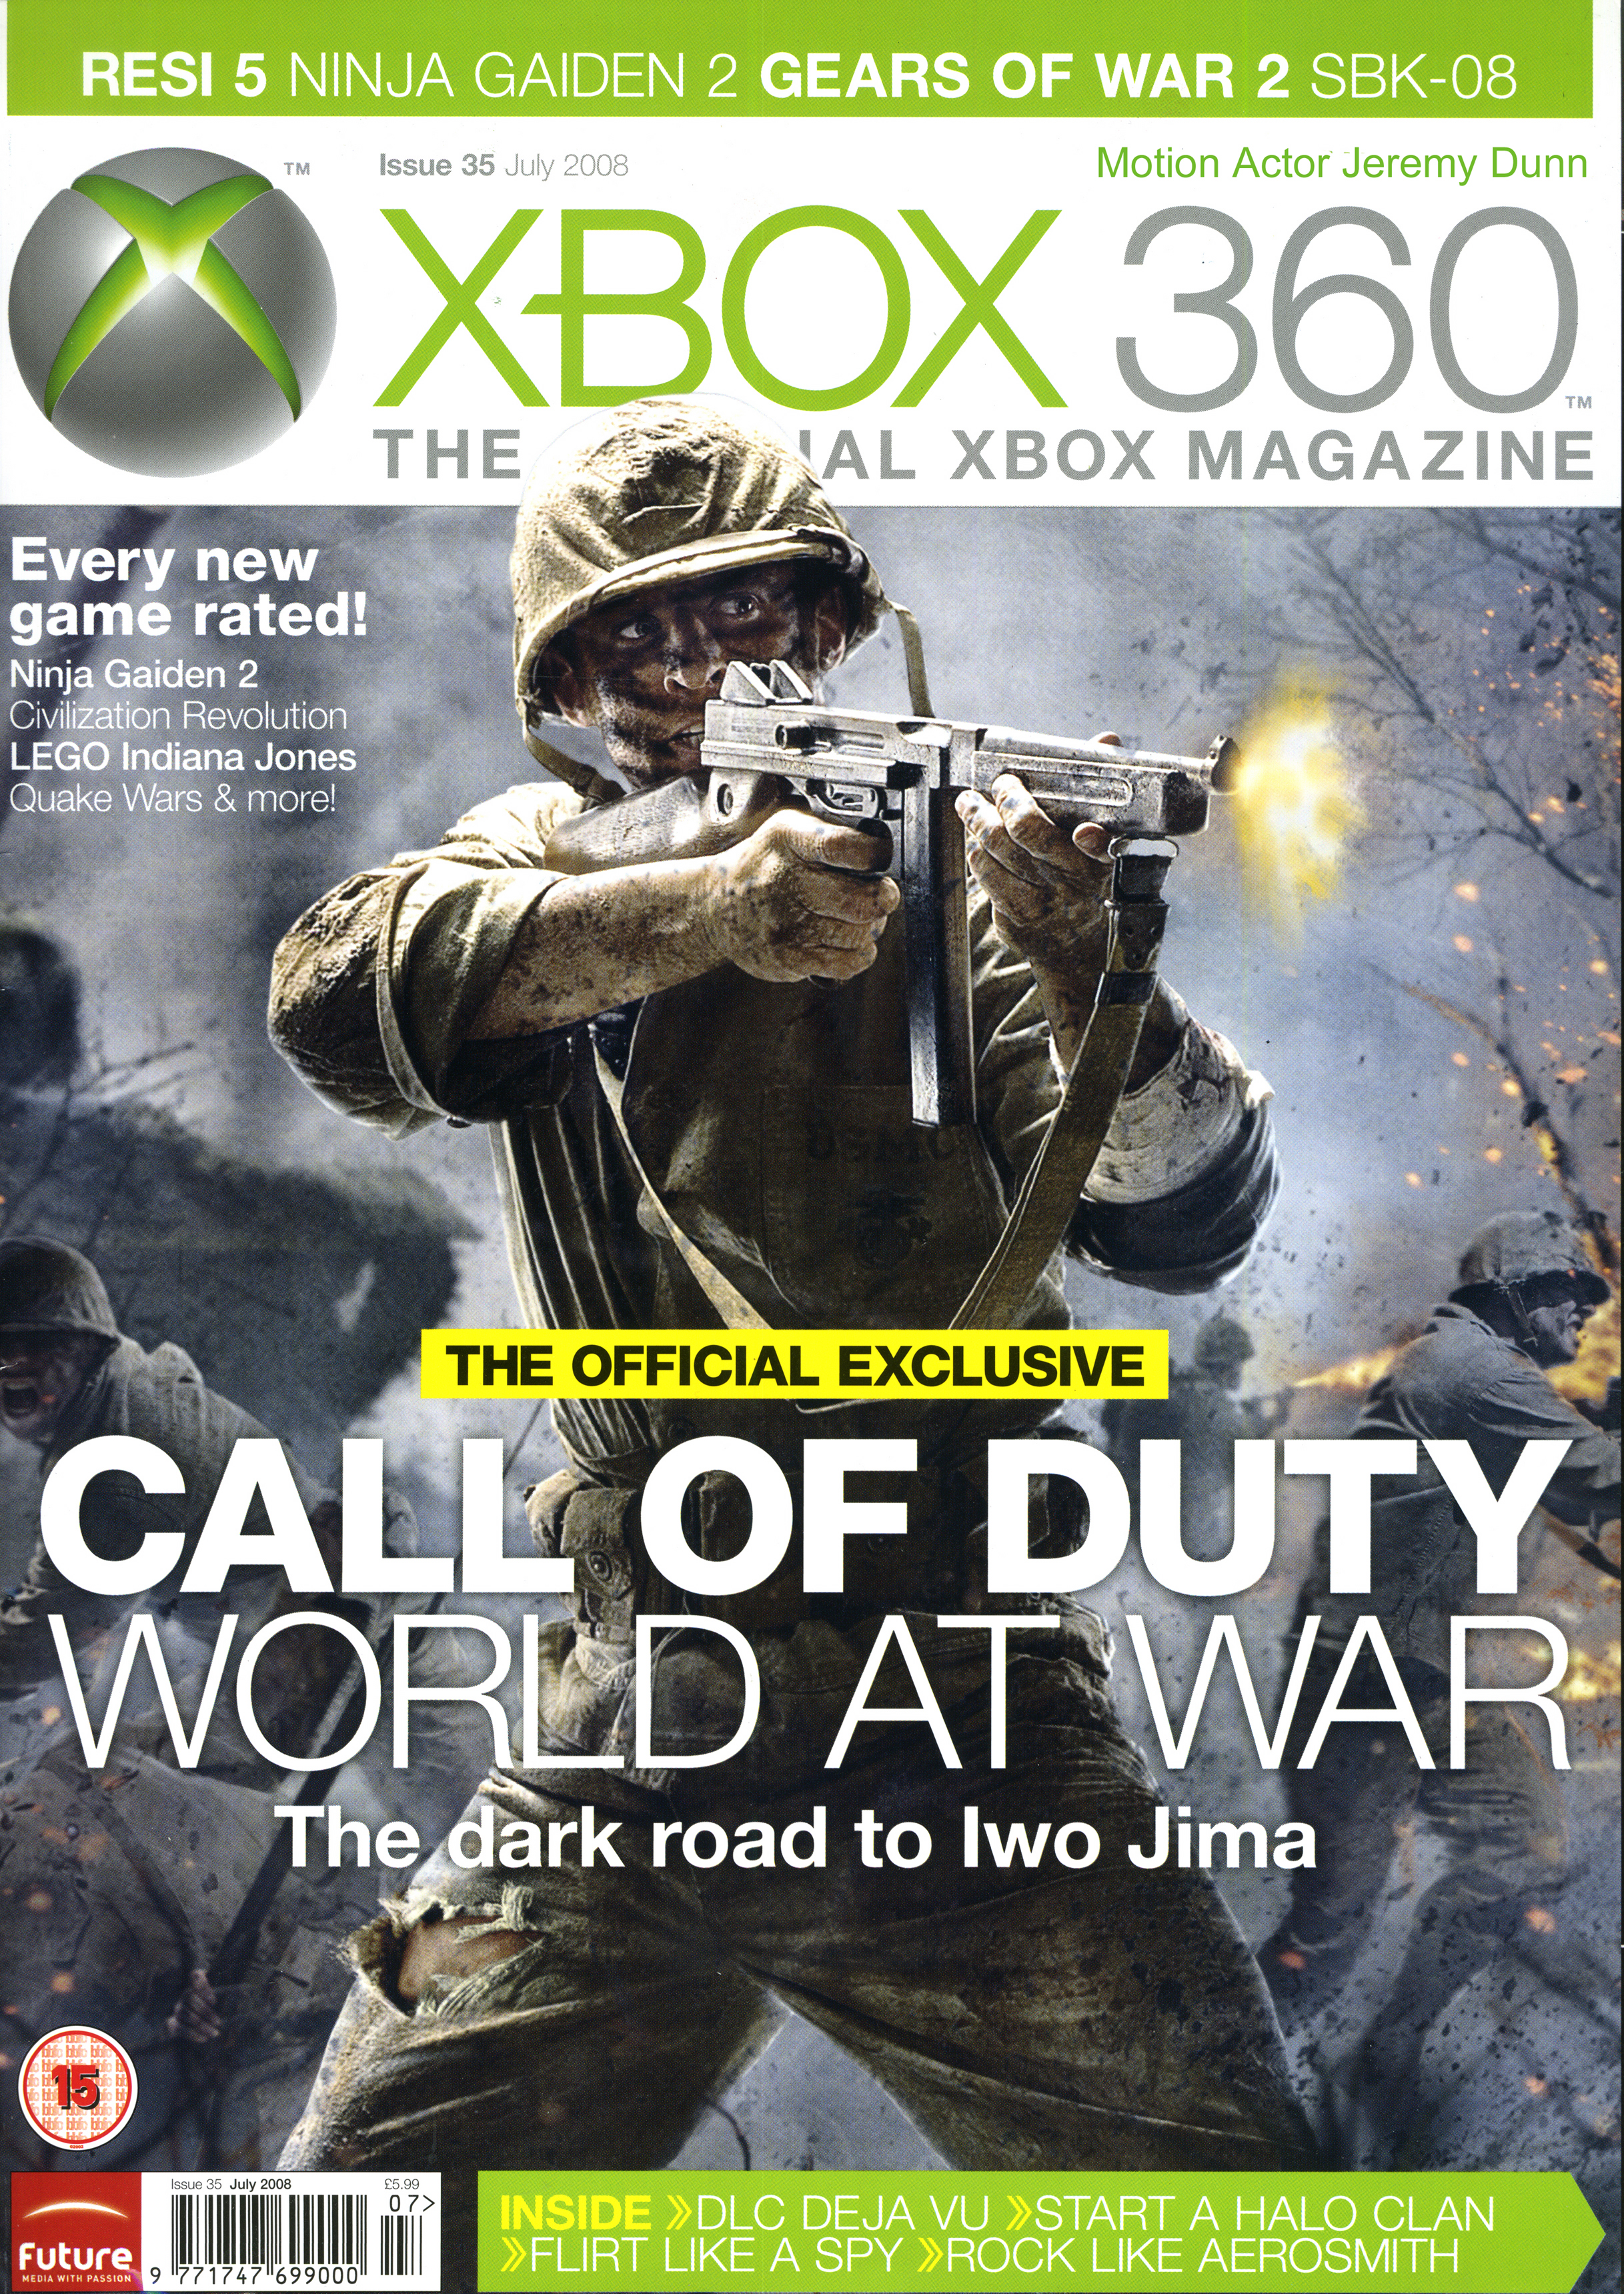 Call of Duty: World at War ~ XBOX 360 Magazine. Jeremy Dunn featured on the cover.